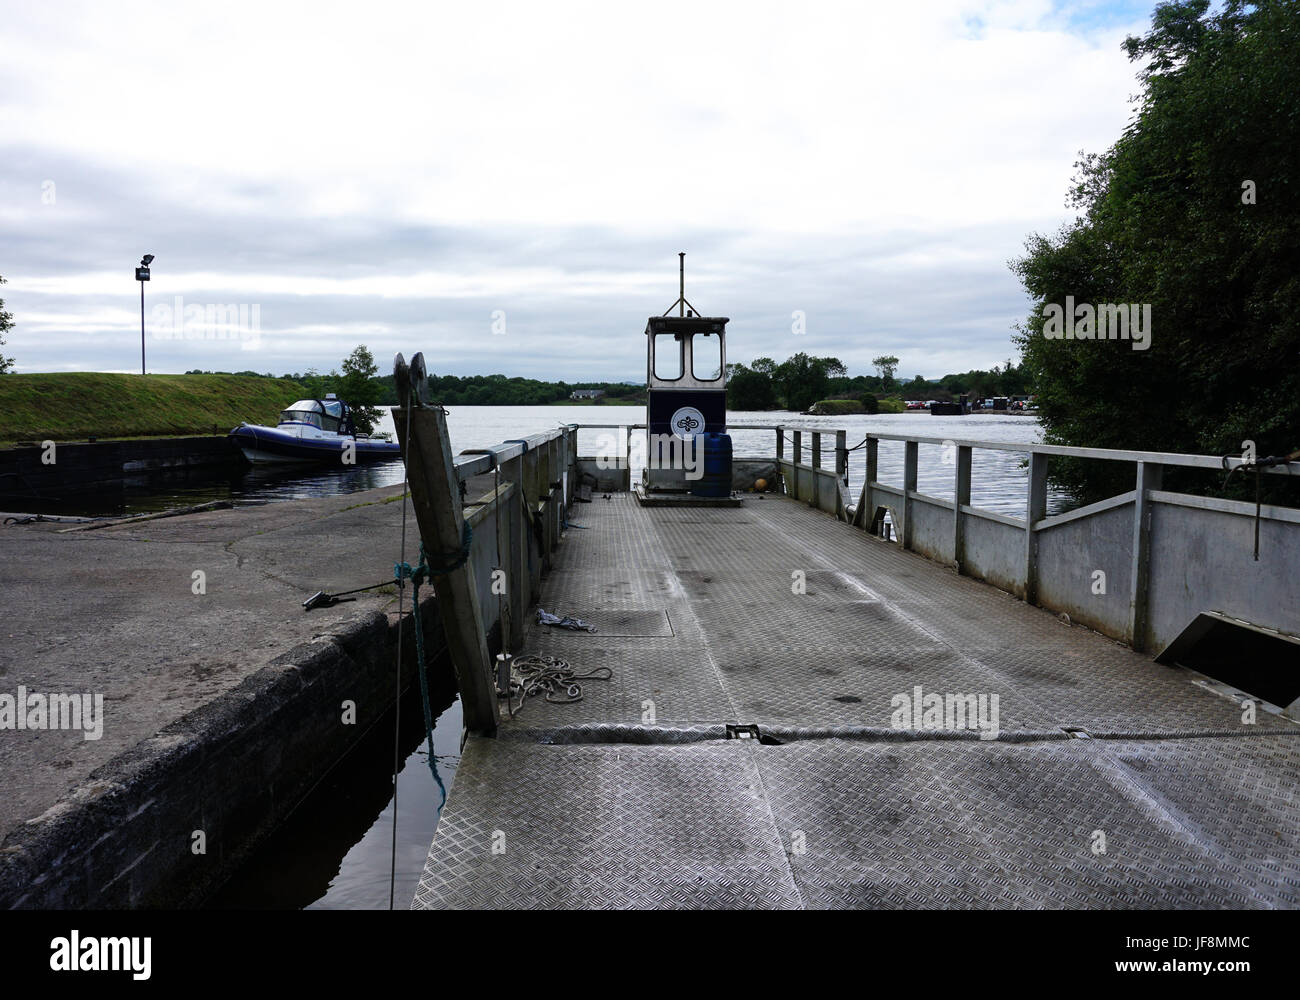 Lusty Beg Boa Island Lough Erne County Fermanagh Northern Ireland Car Carrier and Passenger ferry Stock Photo